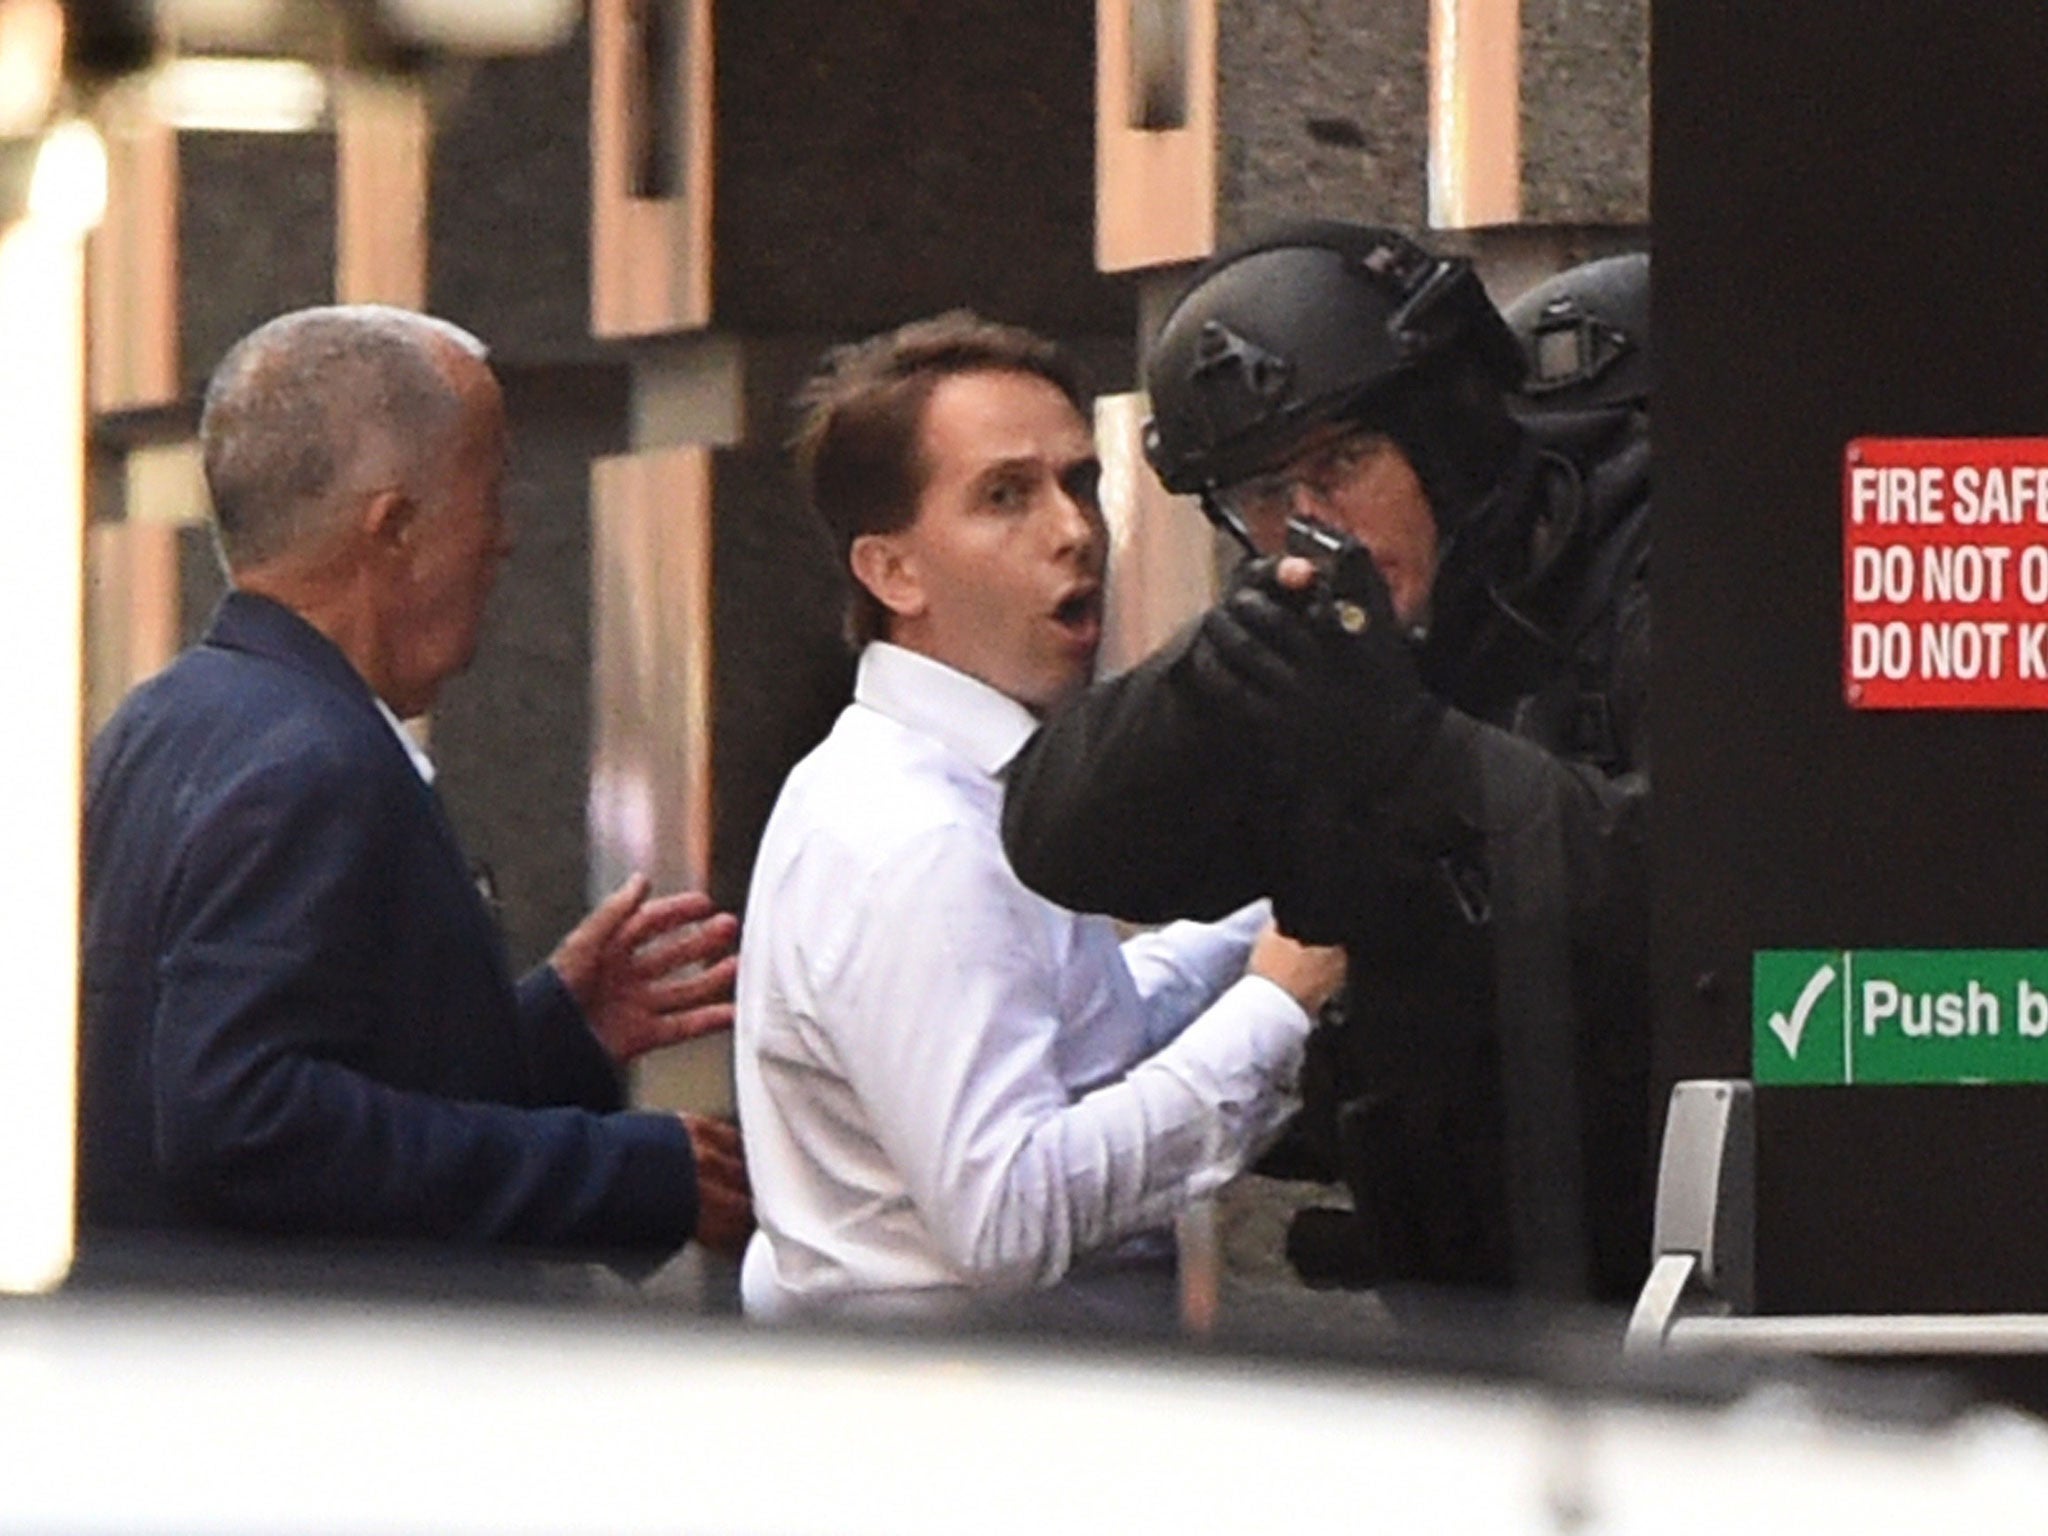 Two hostages run for cover behind a policeman during a hostage siege in a cafe in Sydney